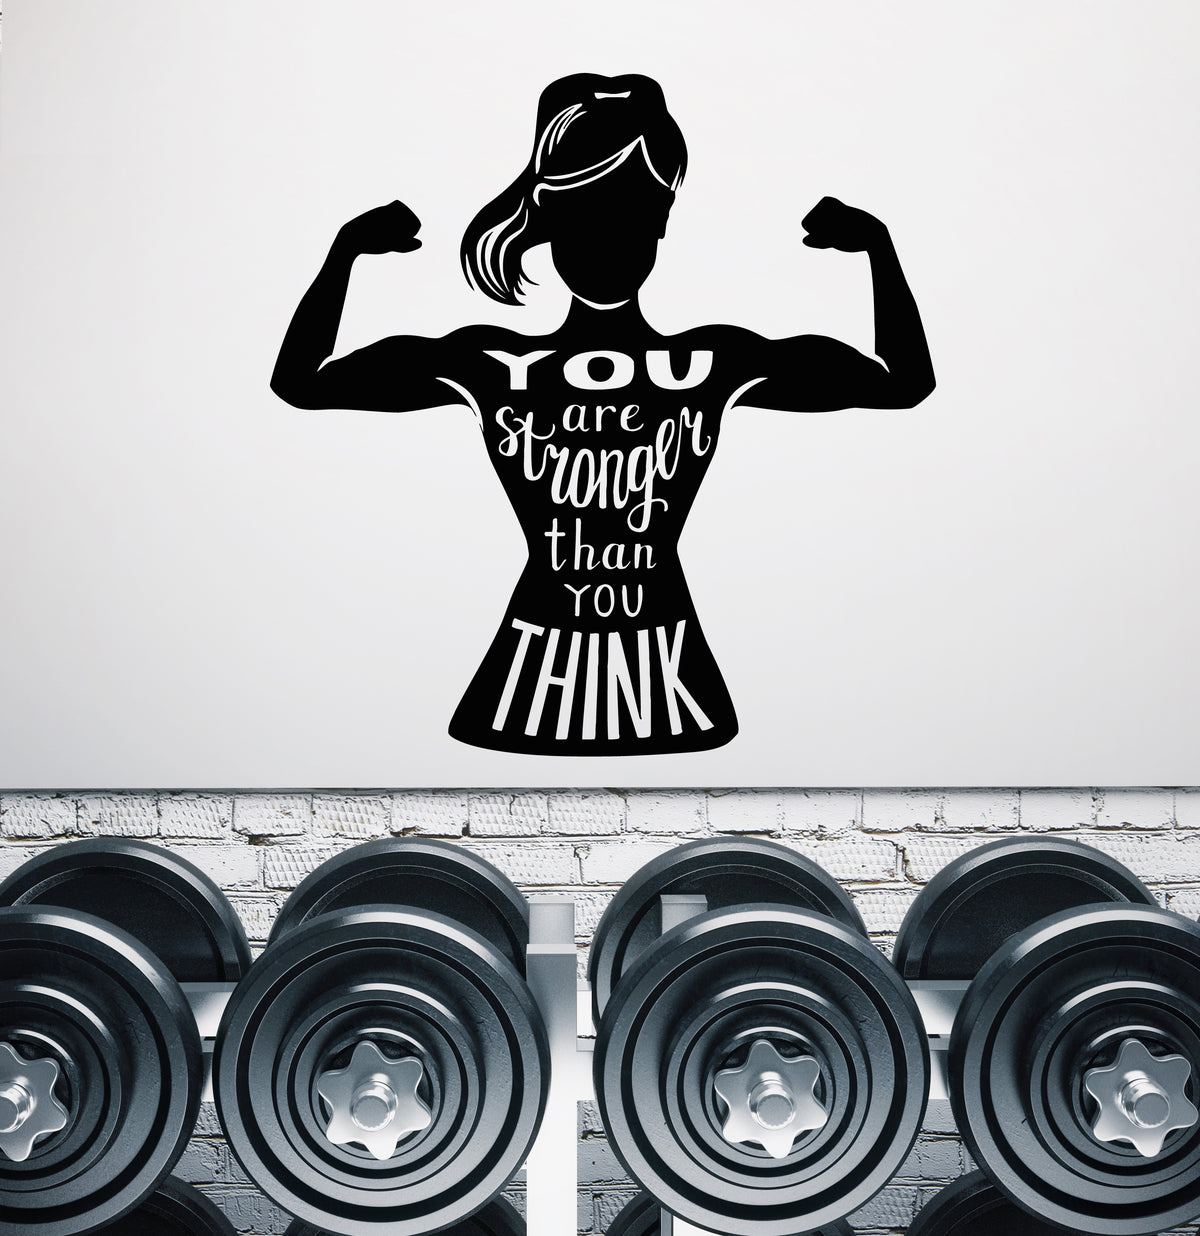 Buy marvellos Fitness Gym Girl Wall Sticker/Sports Girl wal Sticker (Black)  Online at Low Prices in India 